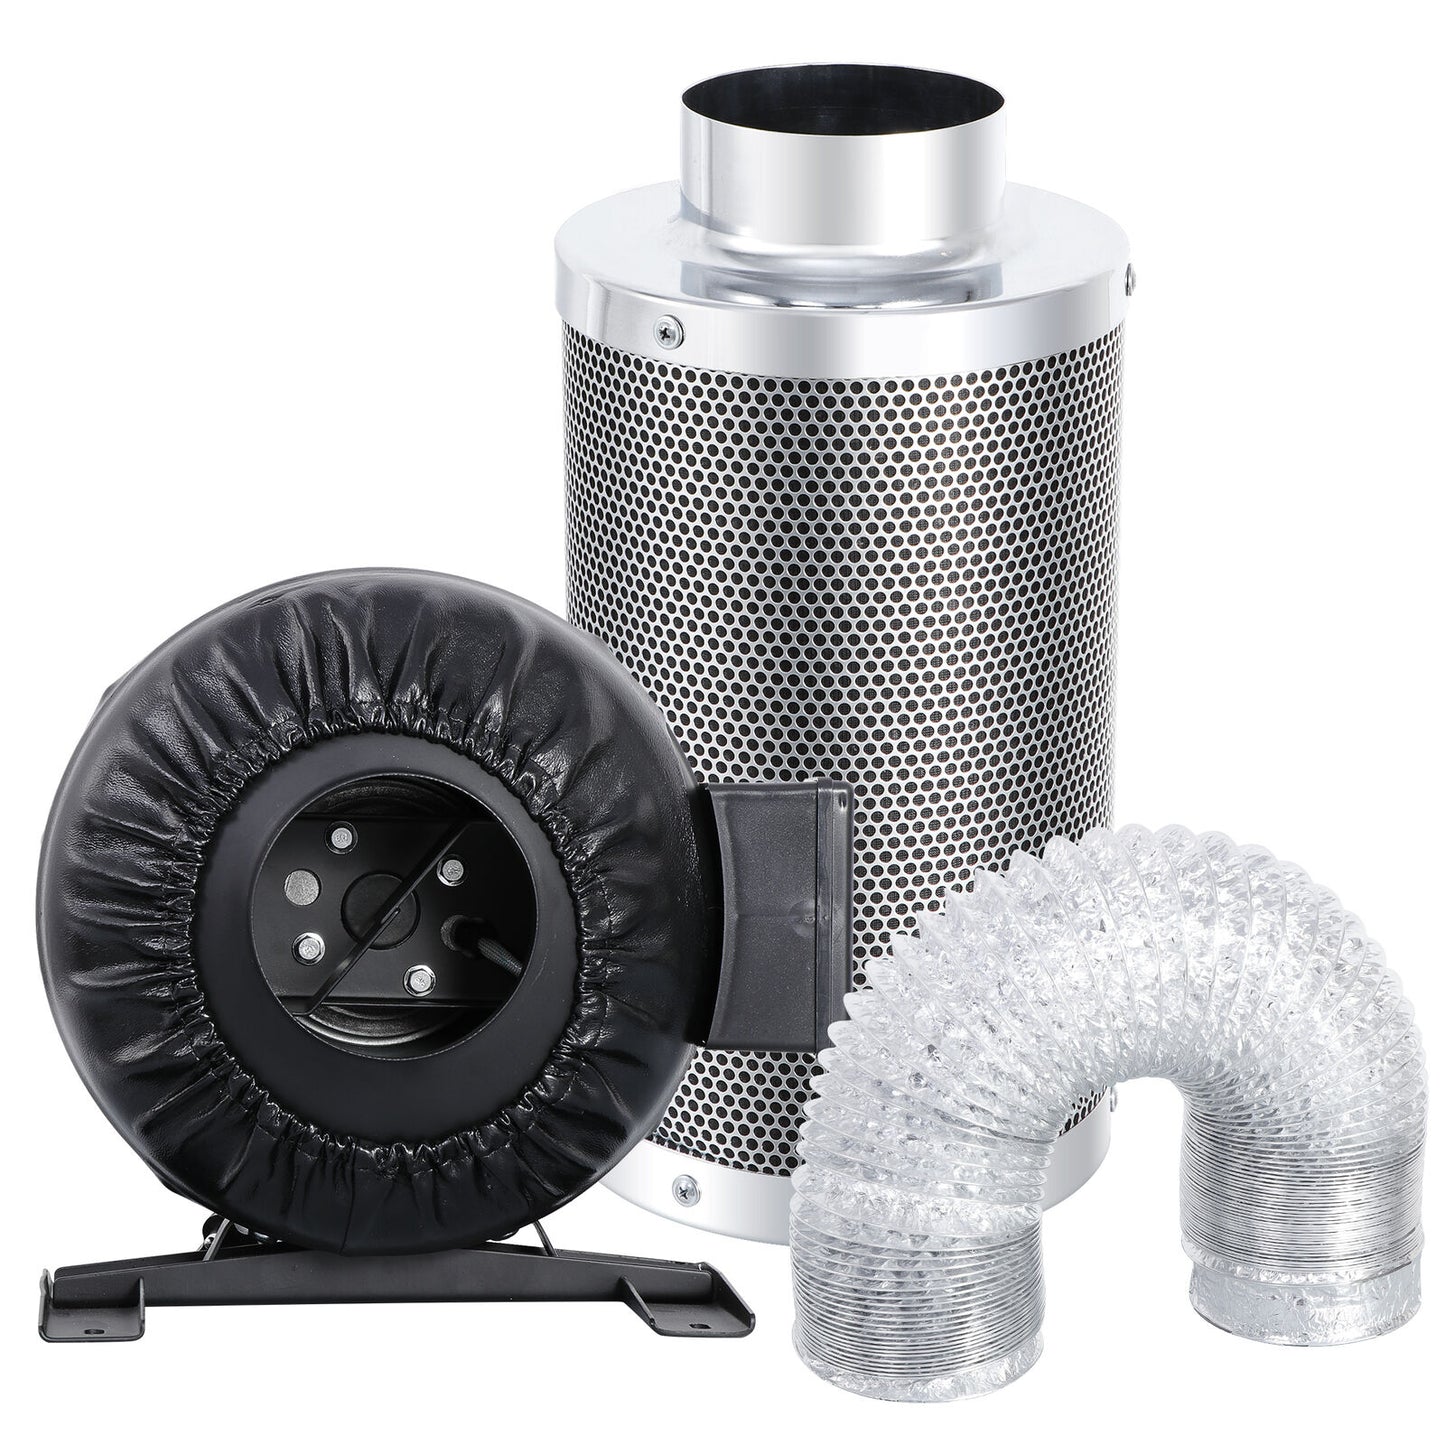 Air Filtration Kit 276 CFM Inline Fan 4 Carbon Filter 8 Feet of Ducting Combo